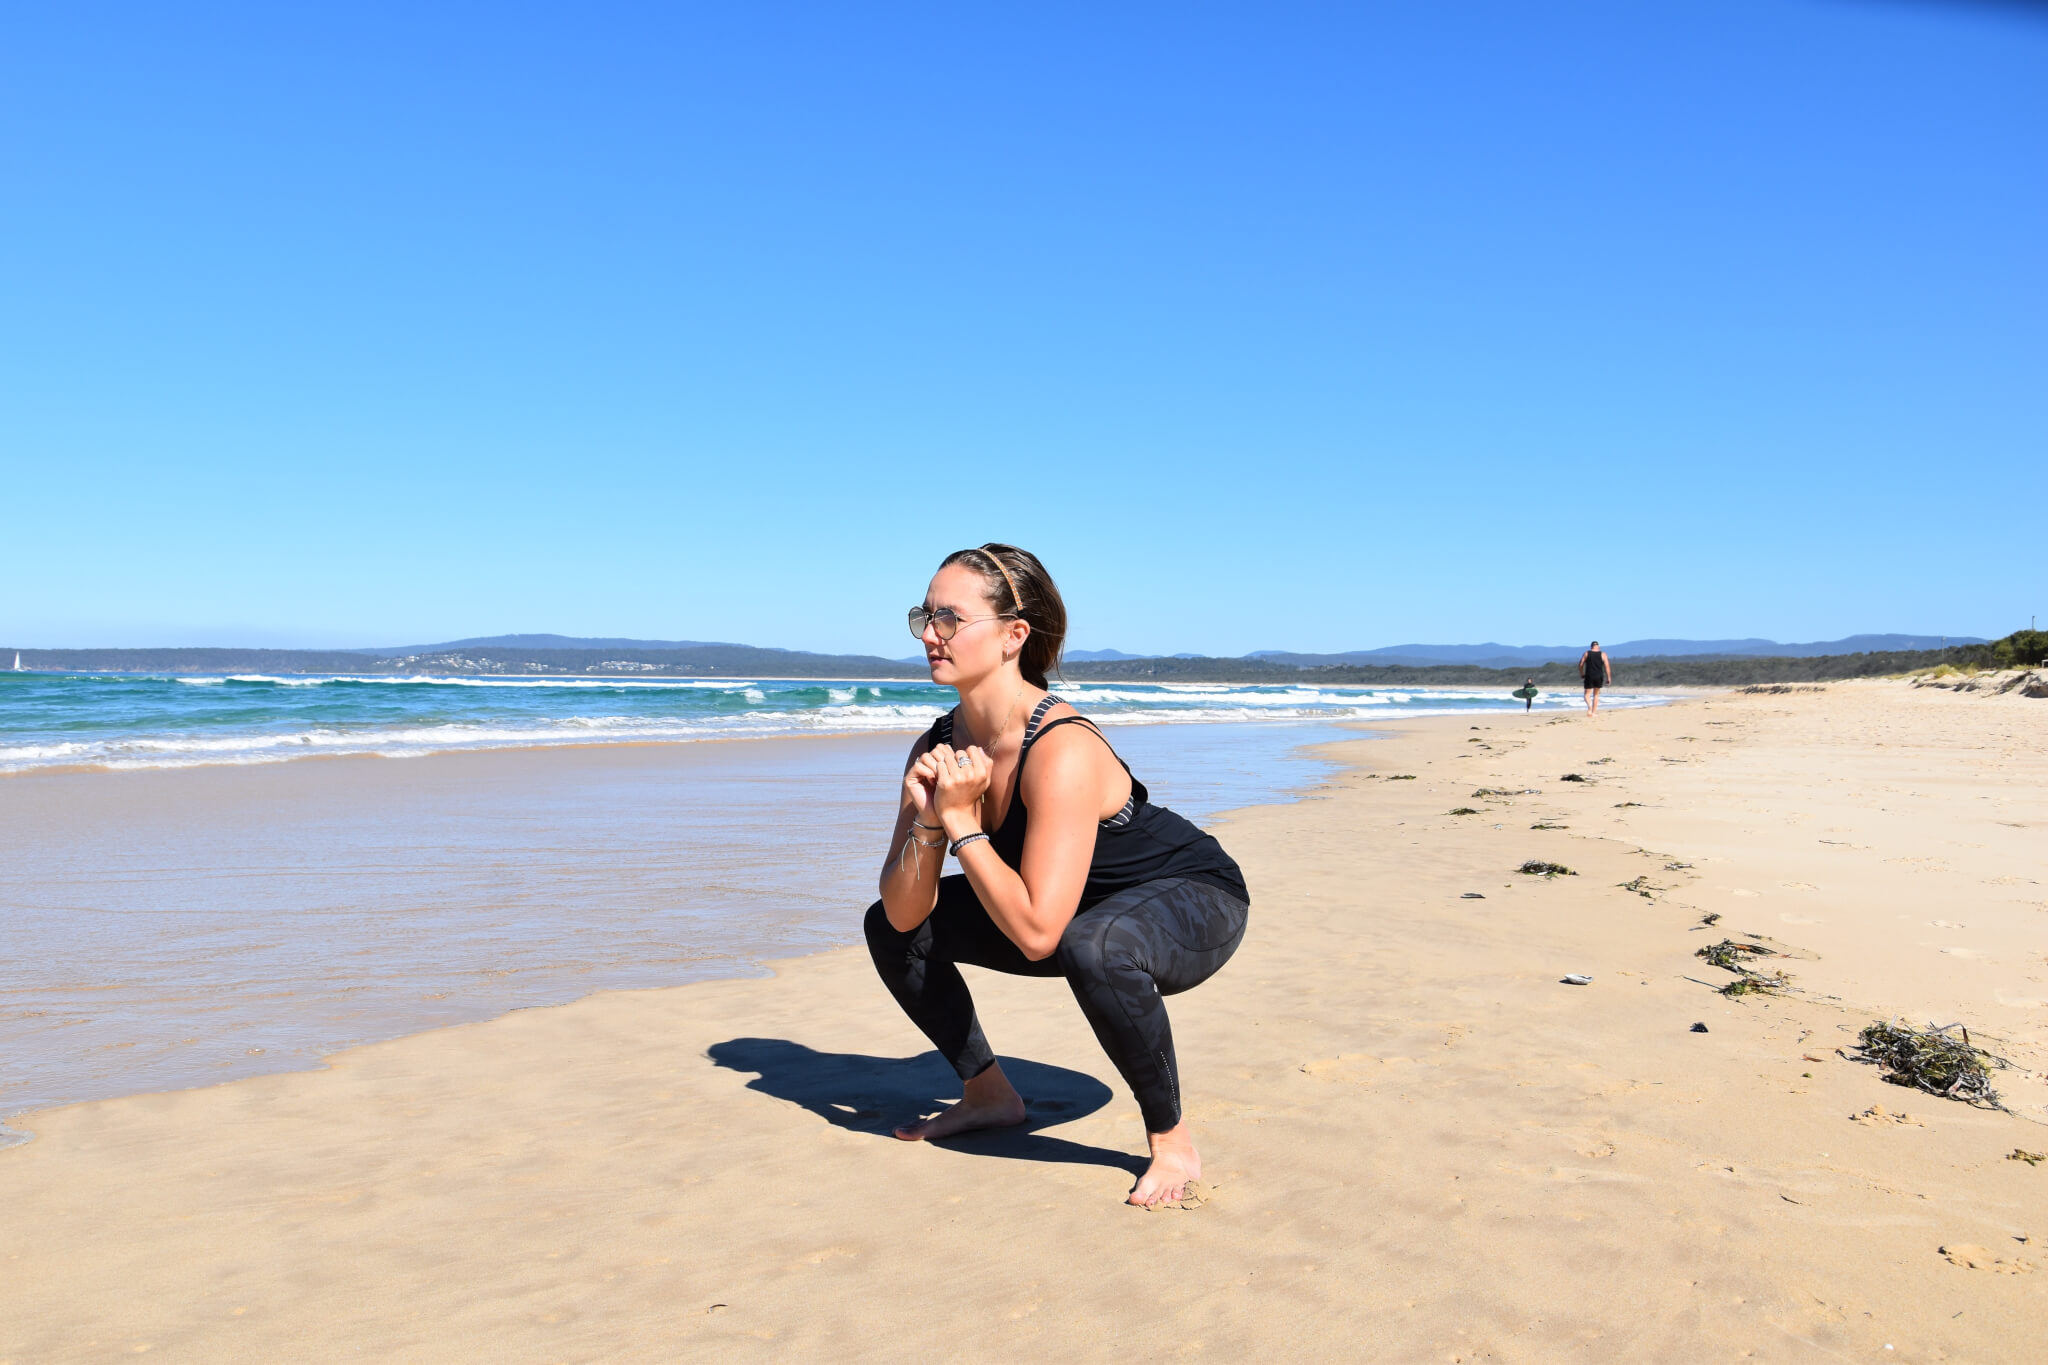 Athlete Whitney Gardner performing a goblet squat, one of the winter training activities recommended to get ready for the season.